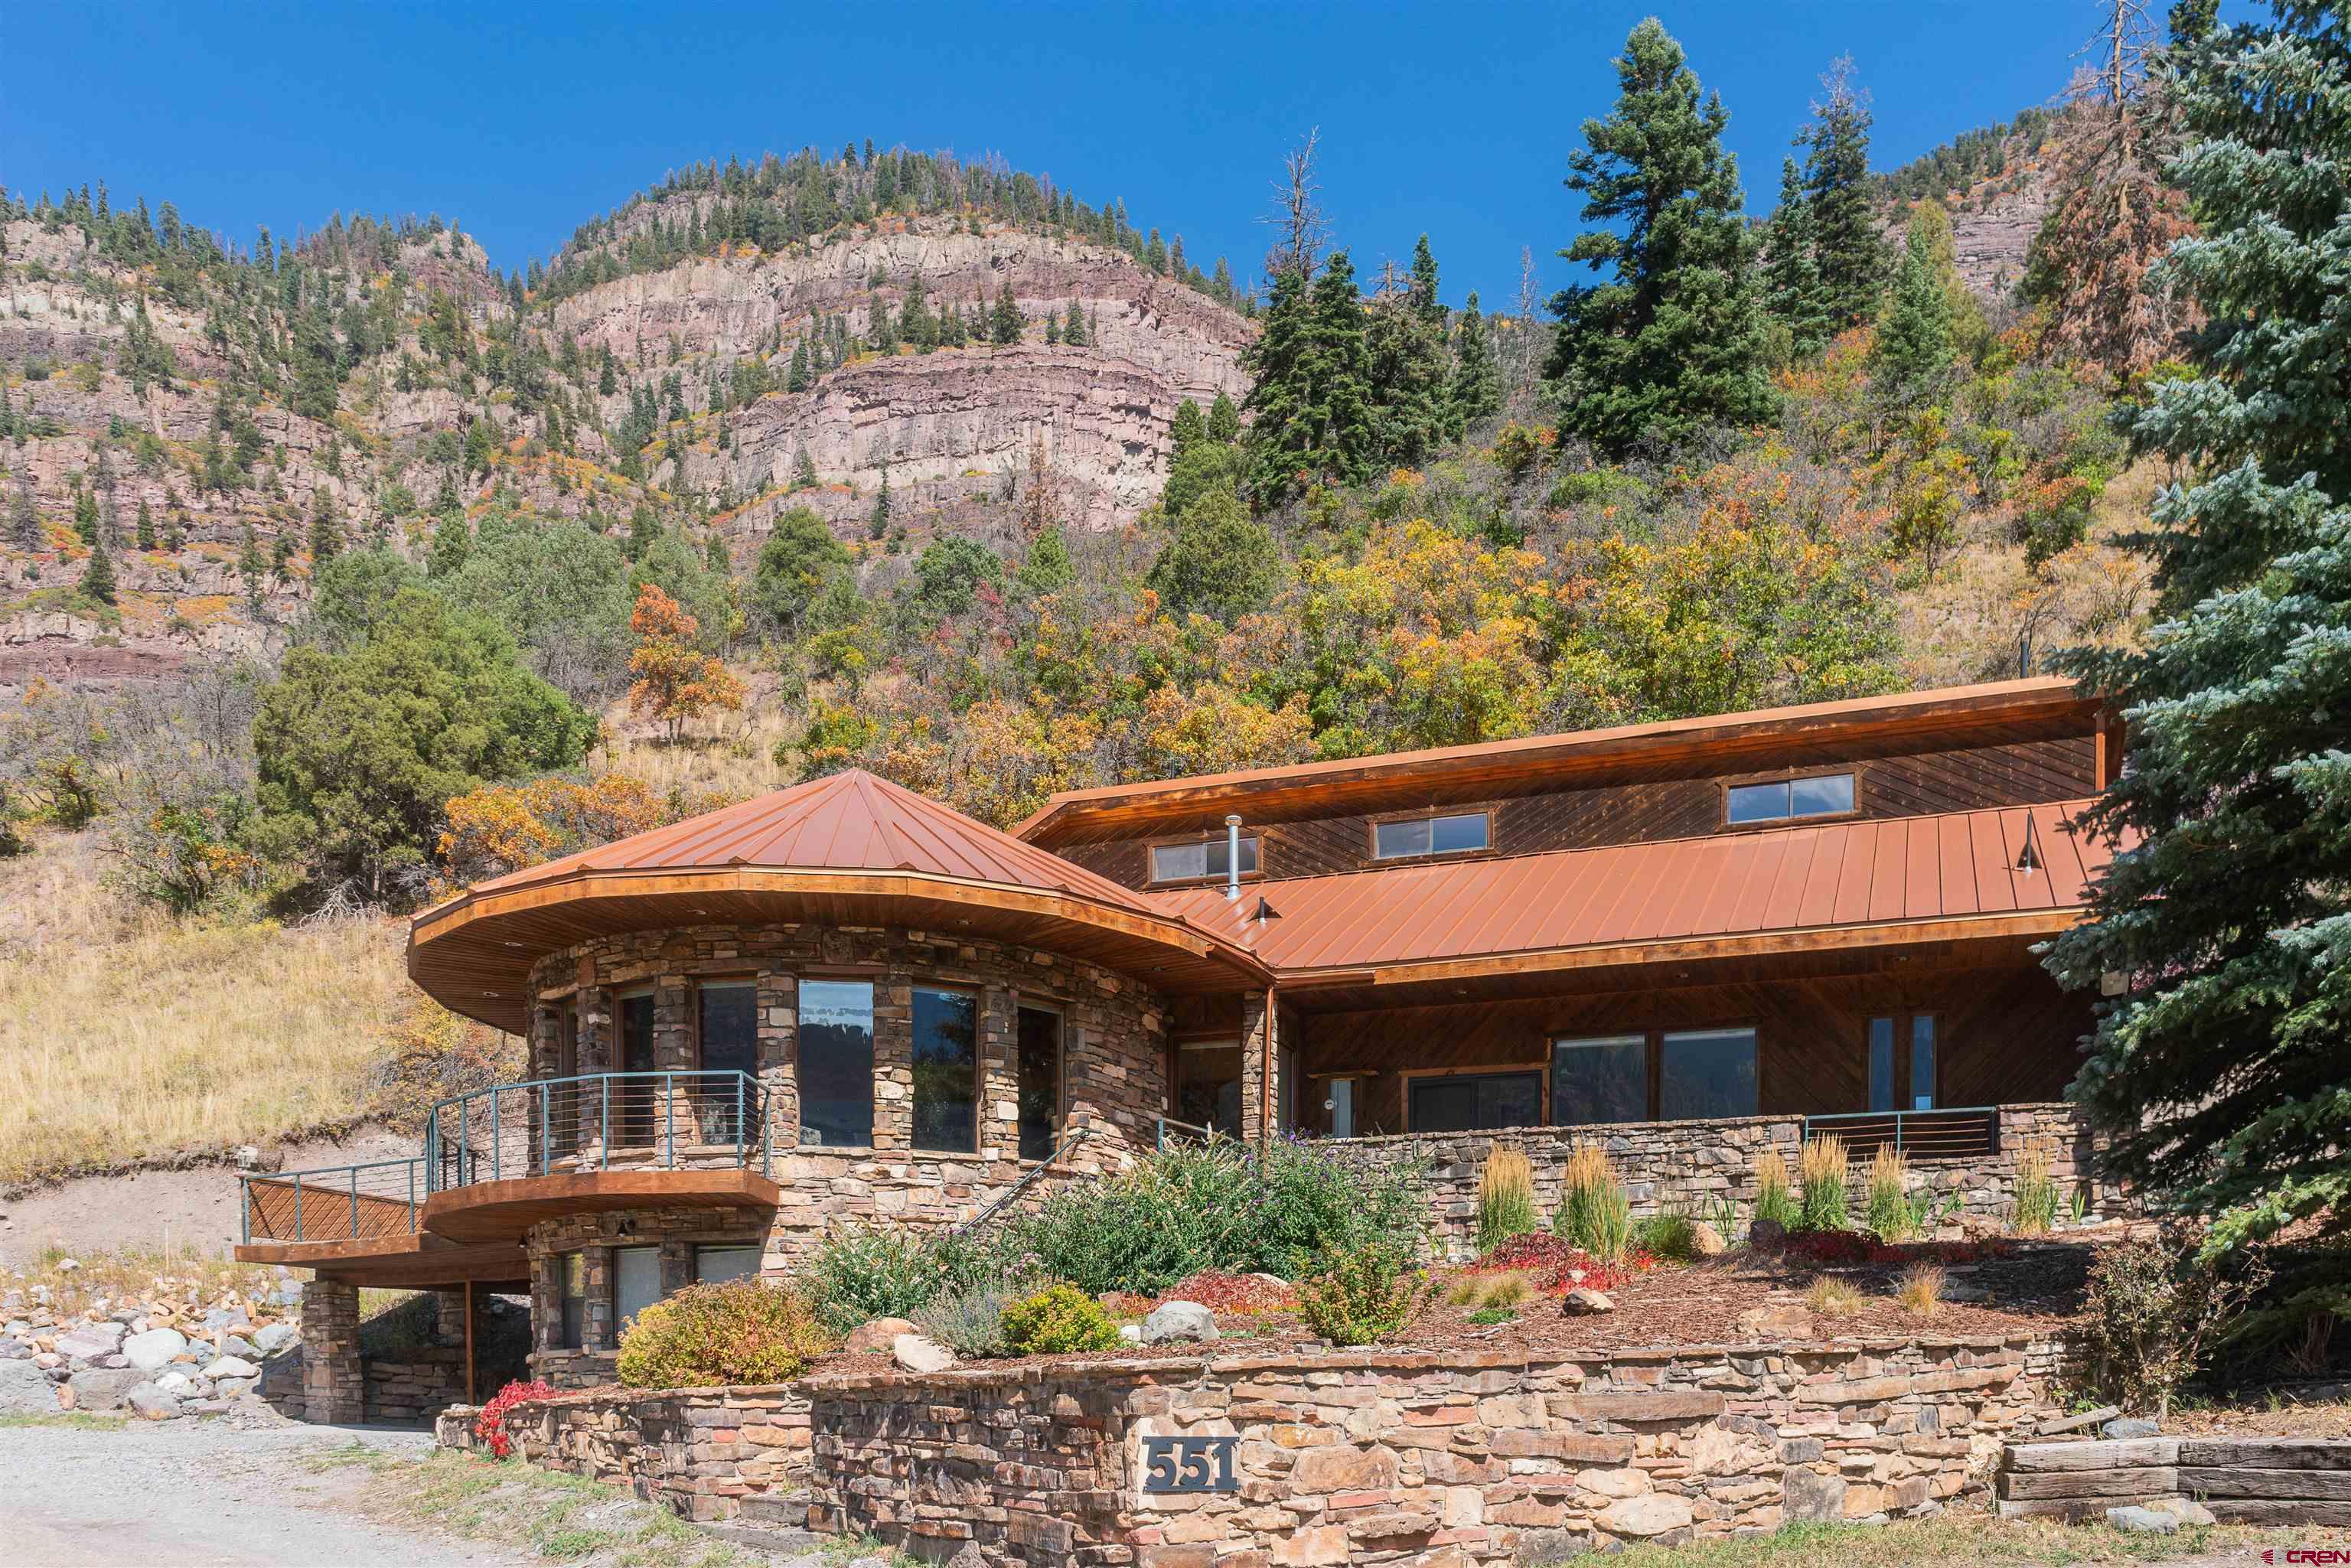 LOCATION IS PRIME FOR THIS beautiful home if you are looking for views.  This Iconic home sits at the top of the world looking toward mountains in all directions and sits with an overview of the City of Ouray from inside and outside of the home.  And yet, you are five minutes from downtown Ouray.  Easily reconizable from downtown Ouray with it's unique architechural style, just waiting for you to move in.  Surrounded by windows, the Living Room has beautiful Hickory floors carried out into the Dining Room and Kitchen.  Kitchen has built in breakfast nook, all stainless appliances including double ovens, dishwasher, 5 burner cooktop, microwave and a large walk-in pantry. There are 3 levels in this home.  The main floor where kitchen and living room are located also has a large office space with built in cabinets, just off of the laundry room with a 3/4 bath.  The Washer and Dryer are included.  Just around the corner you will find a 1/2 bath along with a large family room/den with a gas fireplace with granite and access to a small covered patio. One floor down  is the large and very private Master bedroom also surrounded by windows with views, and a large full bath with soaking tub and separate steam shower, double vanity and huge walk-in closet.  You can also access from this level  the garage/workshop.    One level up from the main level you will find an additional 4 bedrooms each with their own bathroom.  An additional bedroom, being the 6th is being renovated and soon to be completed.     There are patios and decks all around the home, including a hottub. There are two furnaces and the heat is gas forced air.   While some renovations are currently being finished you will see the  Newer roof on the home, new Marvin windows, new interior paint in some rooms, fixtures, etc.  This house is one to put on your list to see, there are very few homes like it in Ouray.  Additionally, there are 2 Residential lots adjoining this property that are included in this listing. Keep for privacy or maybe an investment.